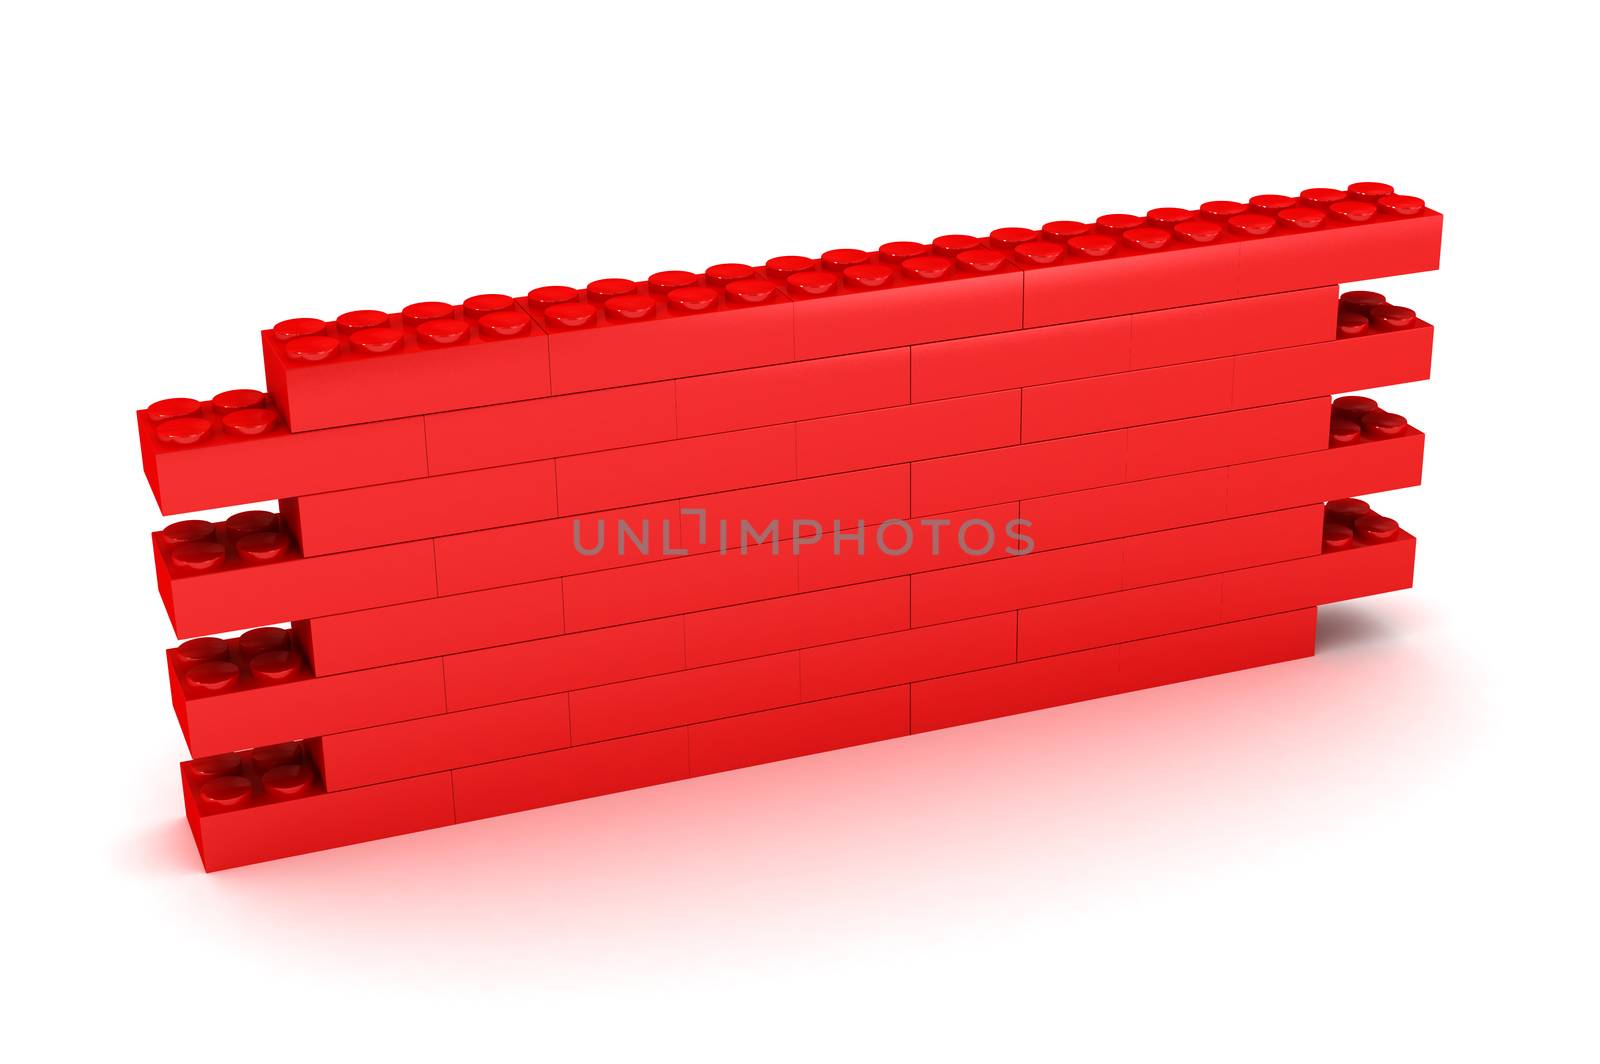 A Colourful 3d Rendered Illustration of a Red Building Block Wall